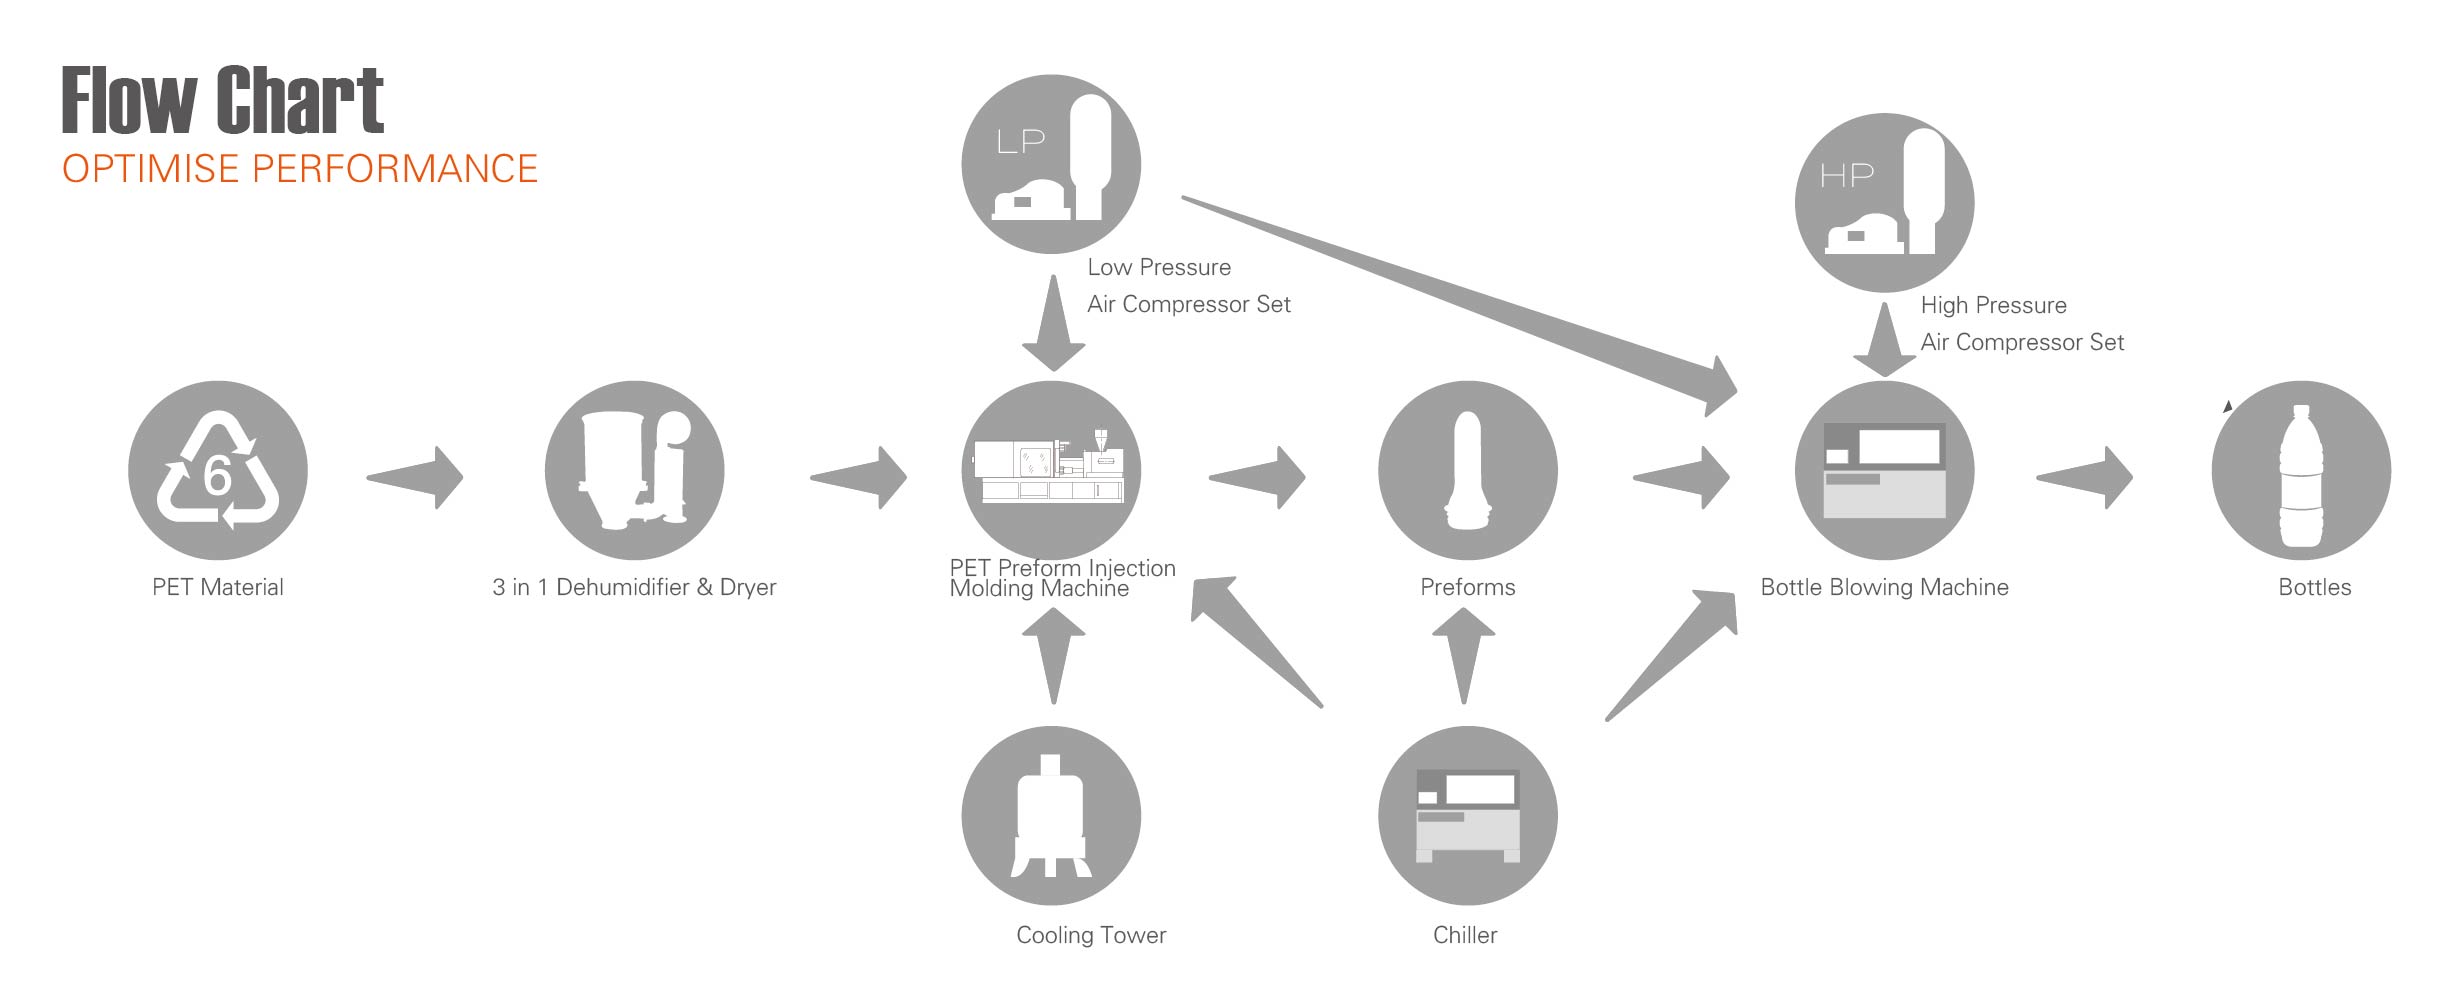 Injection Moulding Flow Chart